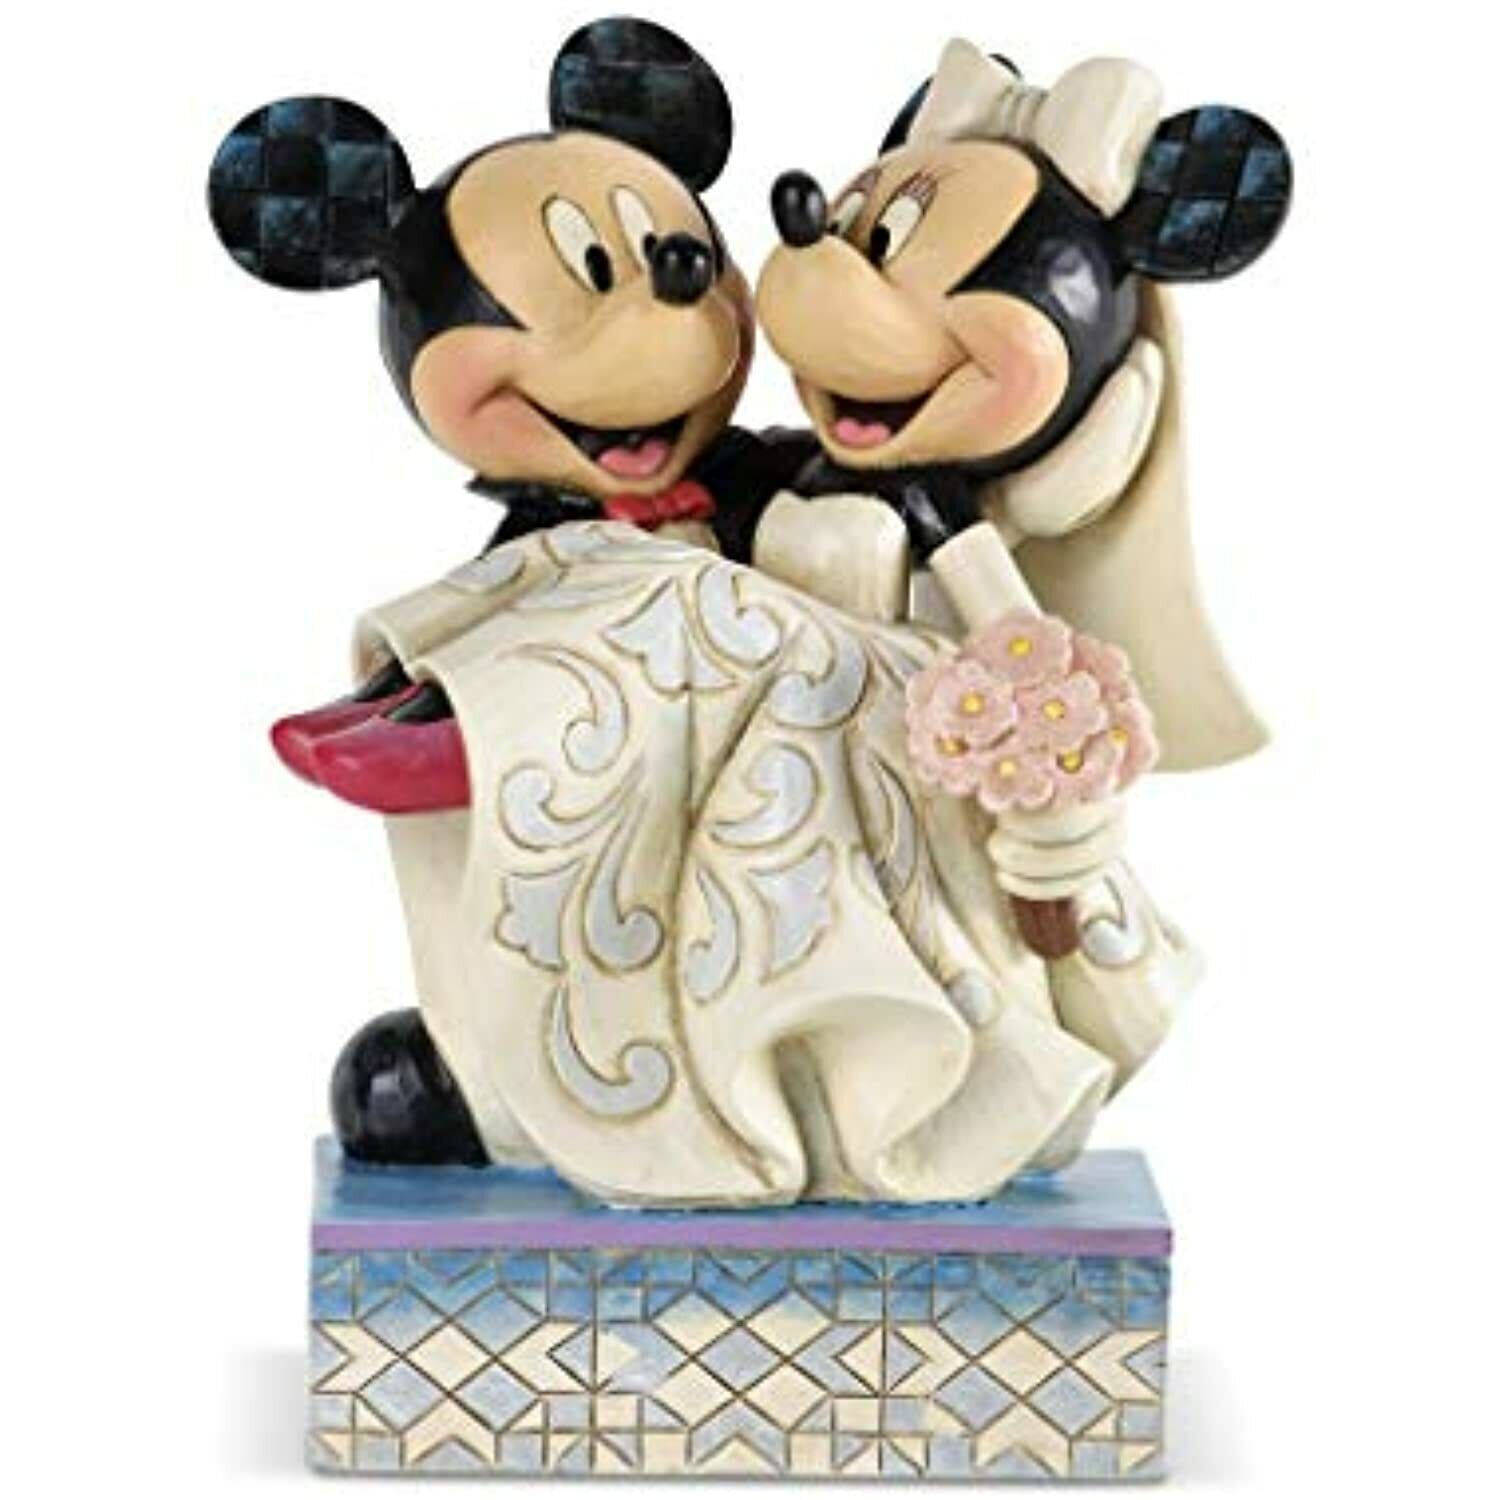 Jim Shore Disney Traditions Mickey & Minnie Mouse Wedding Marriage 4033282